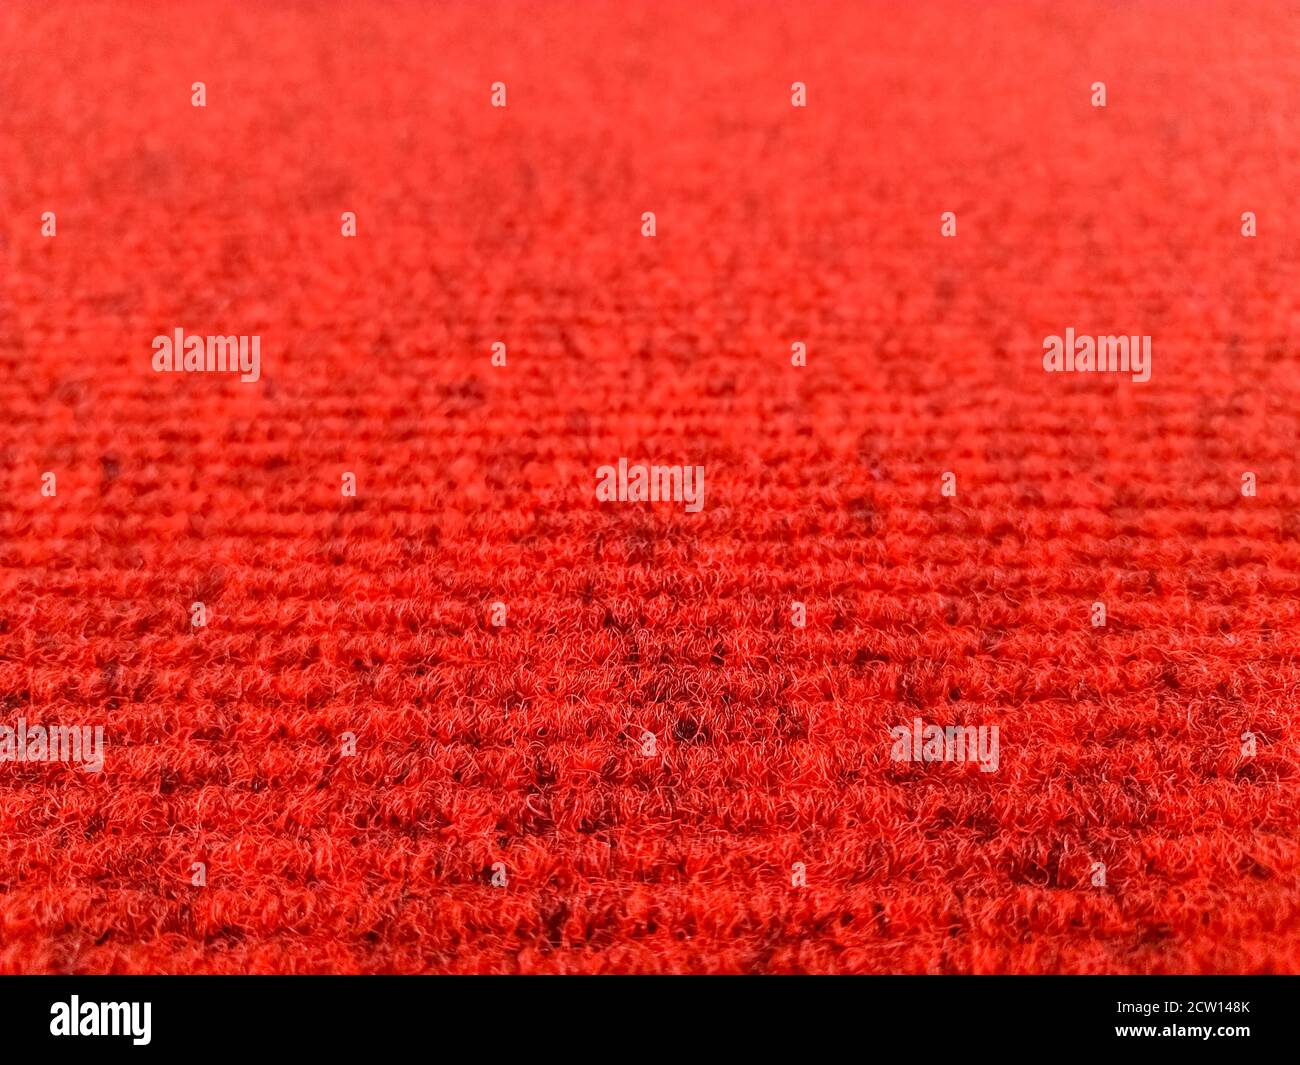 Dark red woolen carpet background with perspective view, selective focus Stock Photo